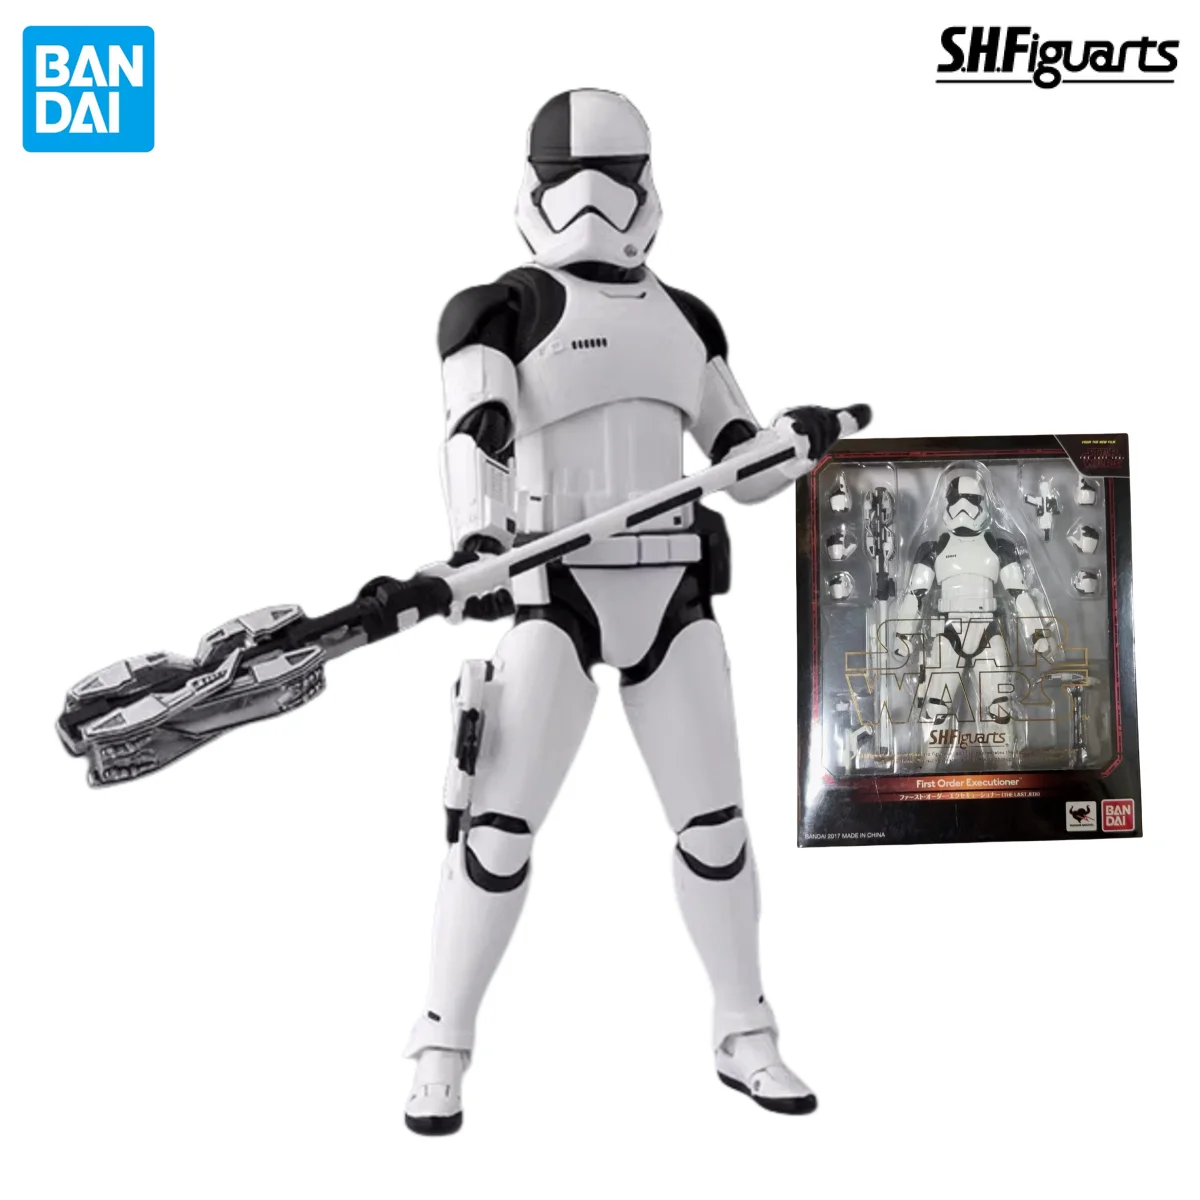 

In Stock BANDAI S.H.Figuarts Original Star Wars First Order Stormtrooper Anime Action Figure Movable Joints Toy Gift for Kid